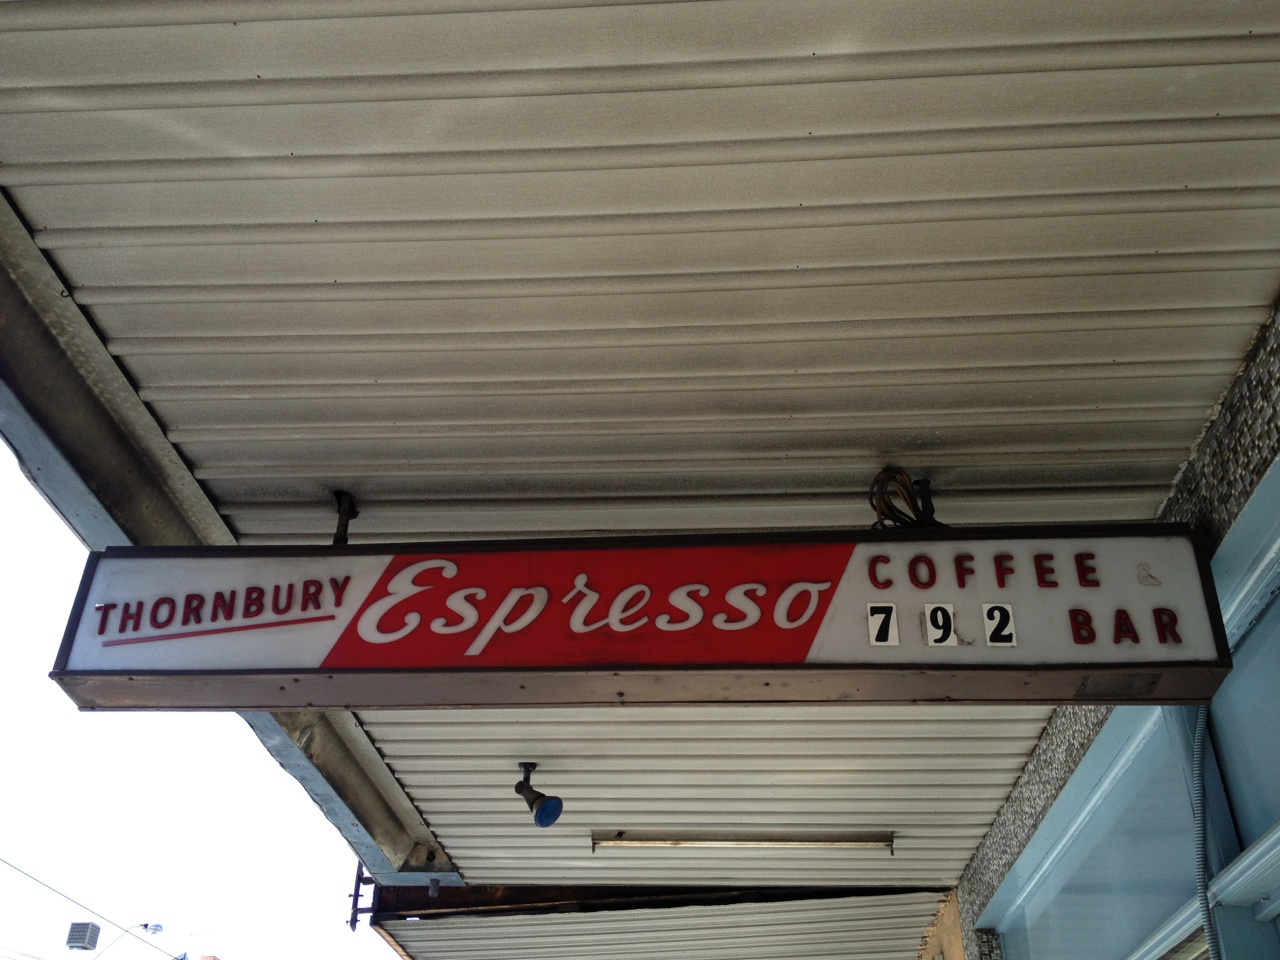 Thornbury Espresso Bar, which Di Stasio remembers visiting as a child with his father.
